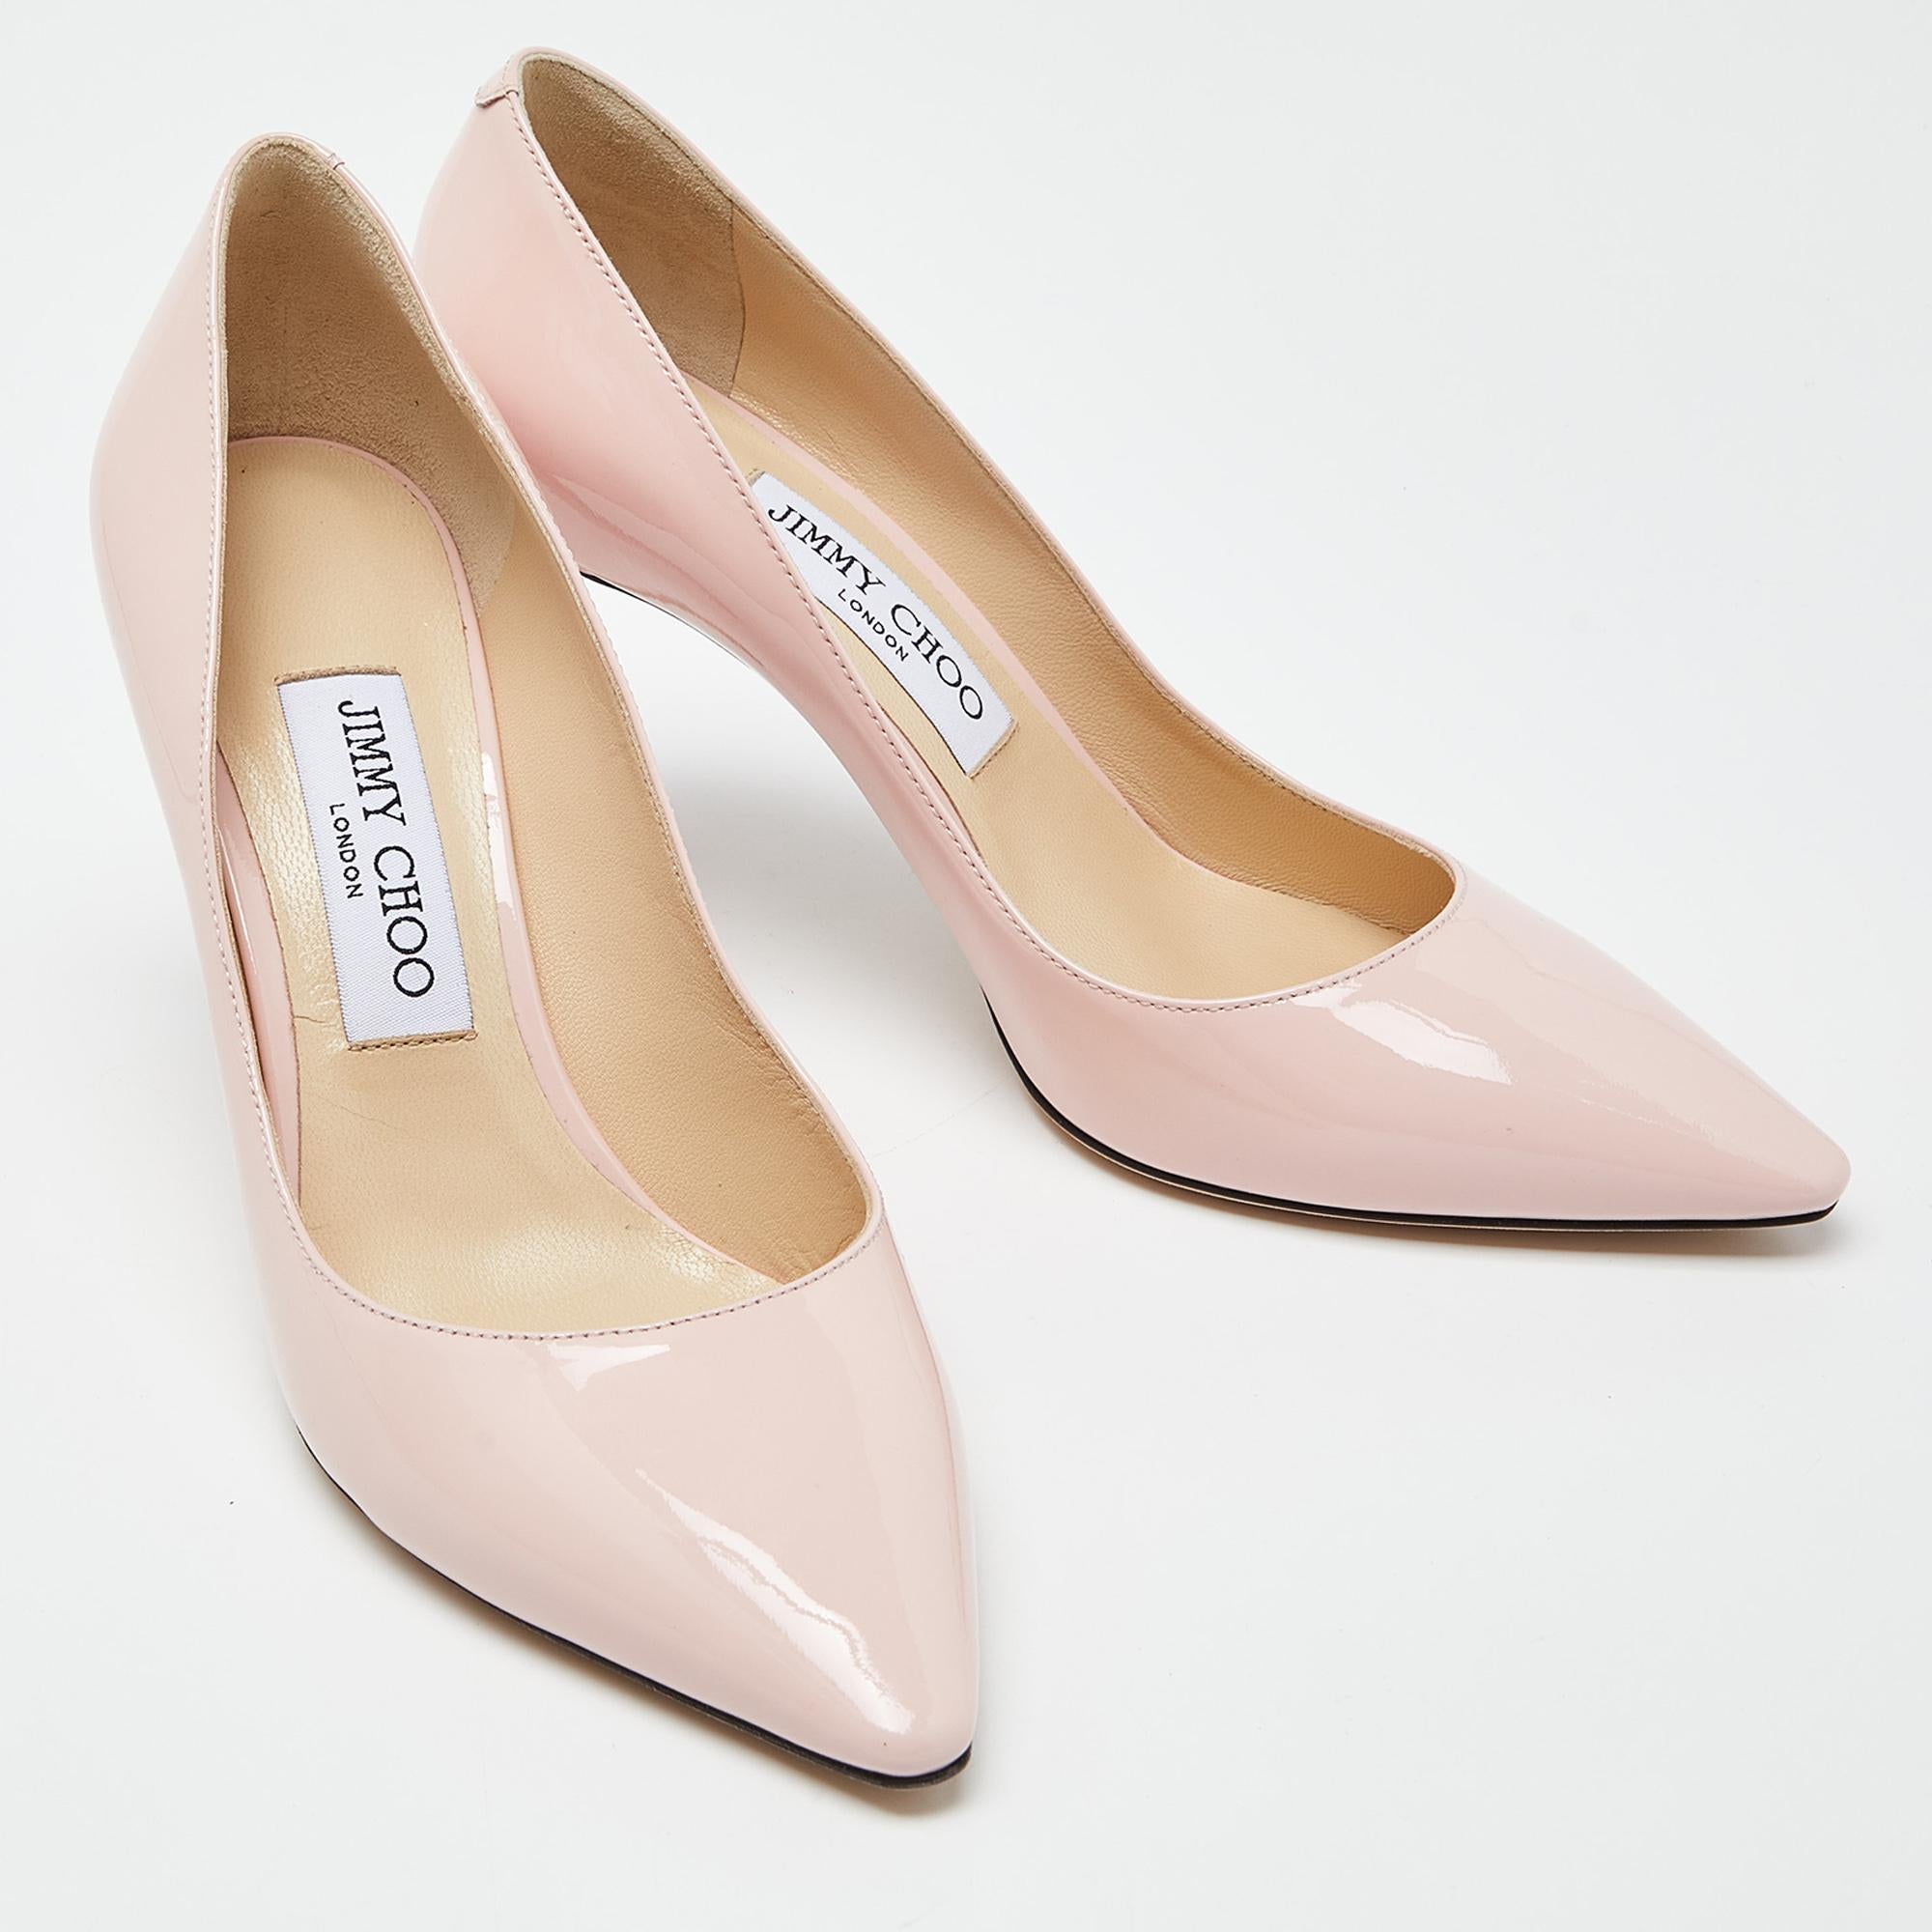 Jimmy Choo Pink Patent Leather Romy Pumps Size 37.5 For Sale 1